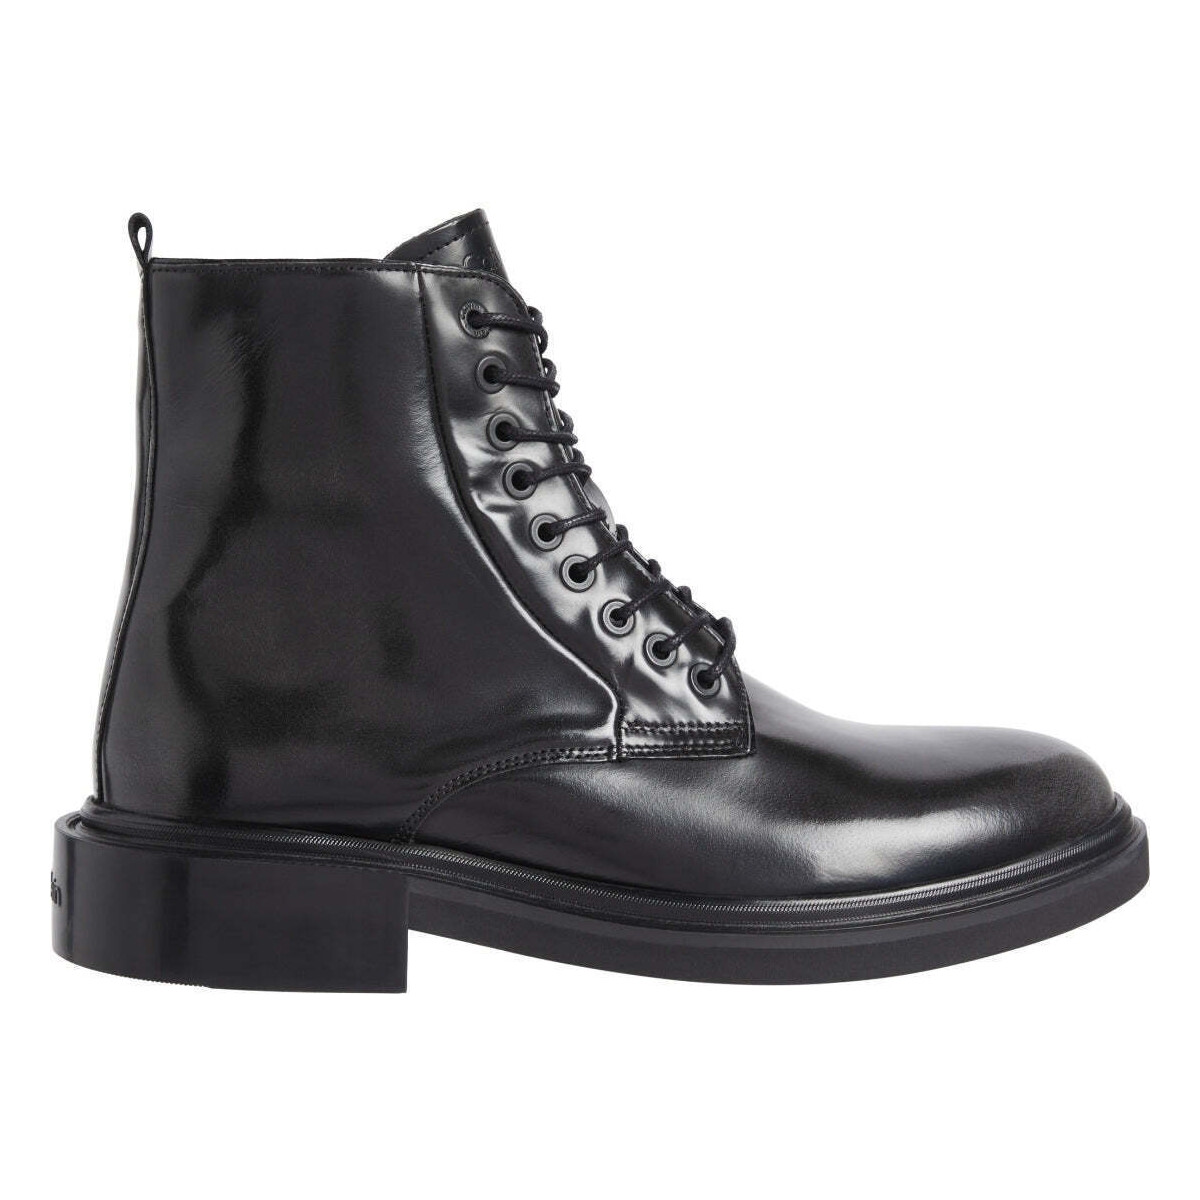 Chaussures Homme Boots Calvin Klein Jeans lace up boot Noir